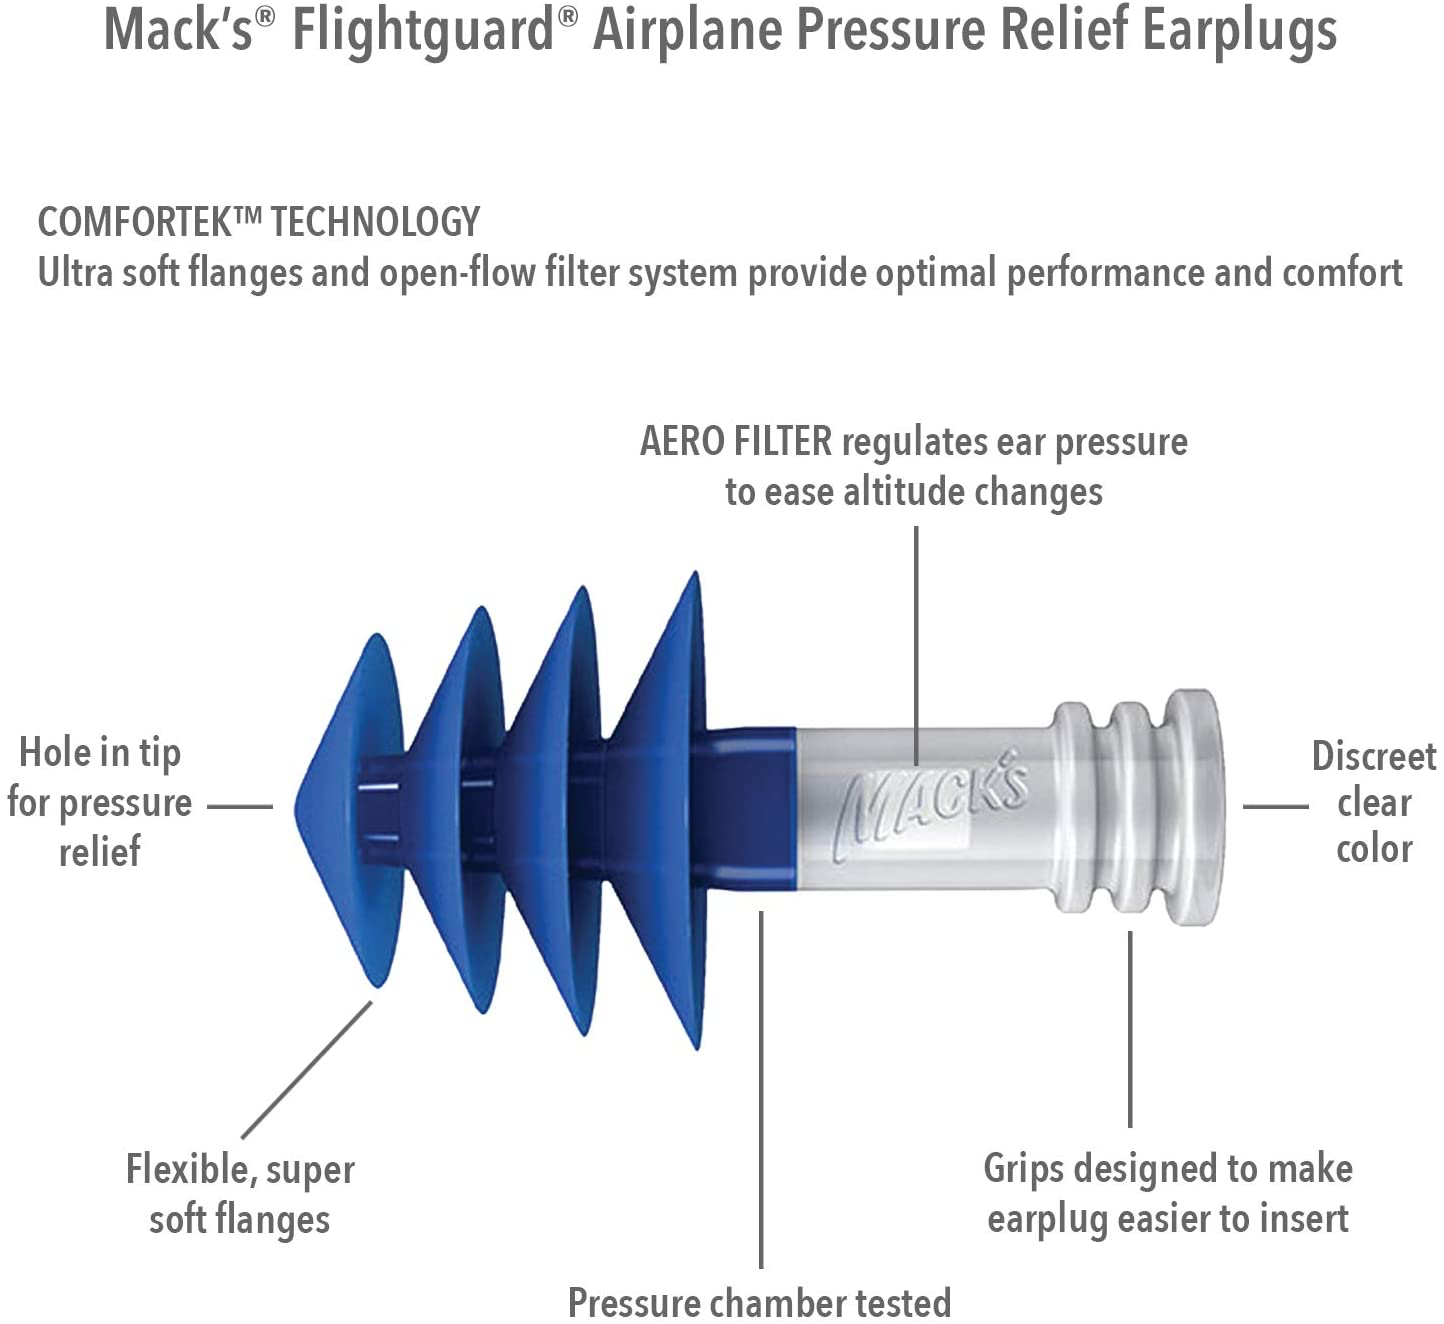 https://www.amazon.com/Macks-Flightguard-Airplane-Pressure-Earplugs/dp/B01K9RHZ3S/ref=pd_lpo_2?pd_rd_i=B01K9RHZ3S&psc=1  Mack's flightguard ear plugs for flying; hearing protection; resuable earplugs for inner ear discomfort when flying; advanced pressure filter and flanges for protection, fits comfortably in ear canal for hearing protection and pain reduction from air pressure. 